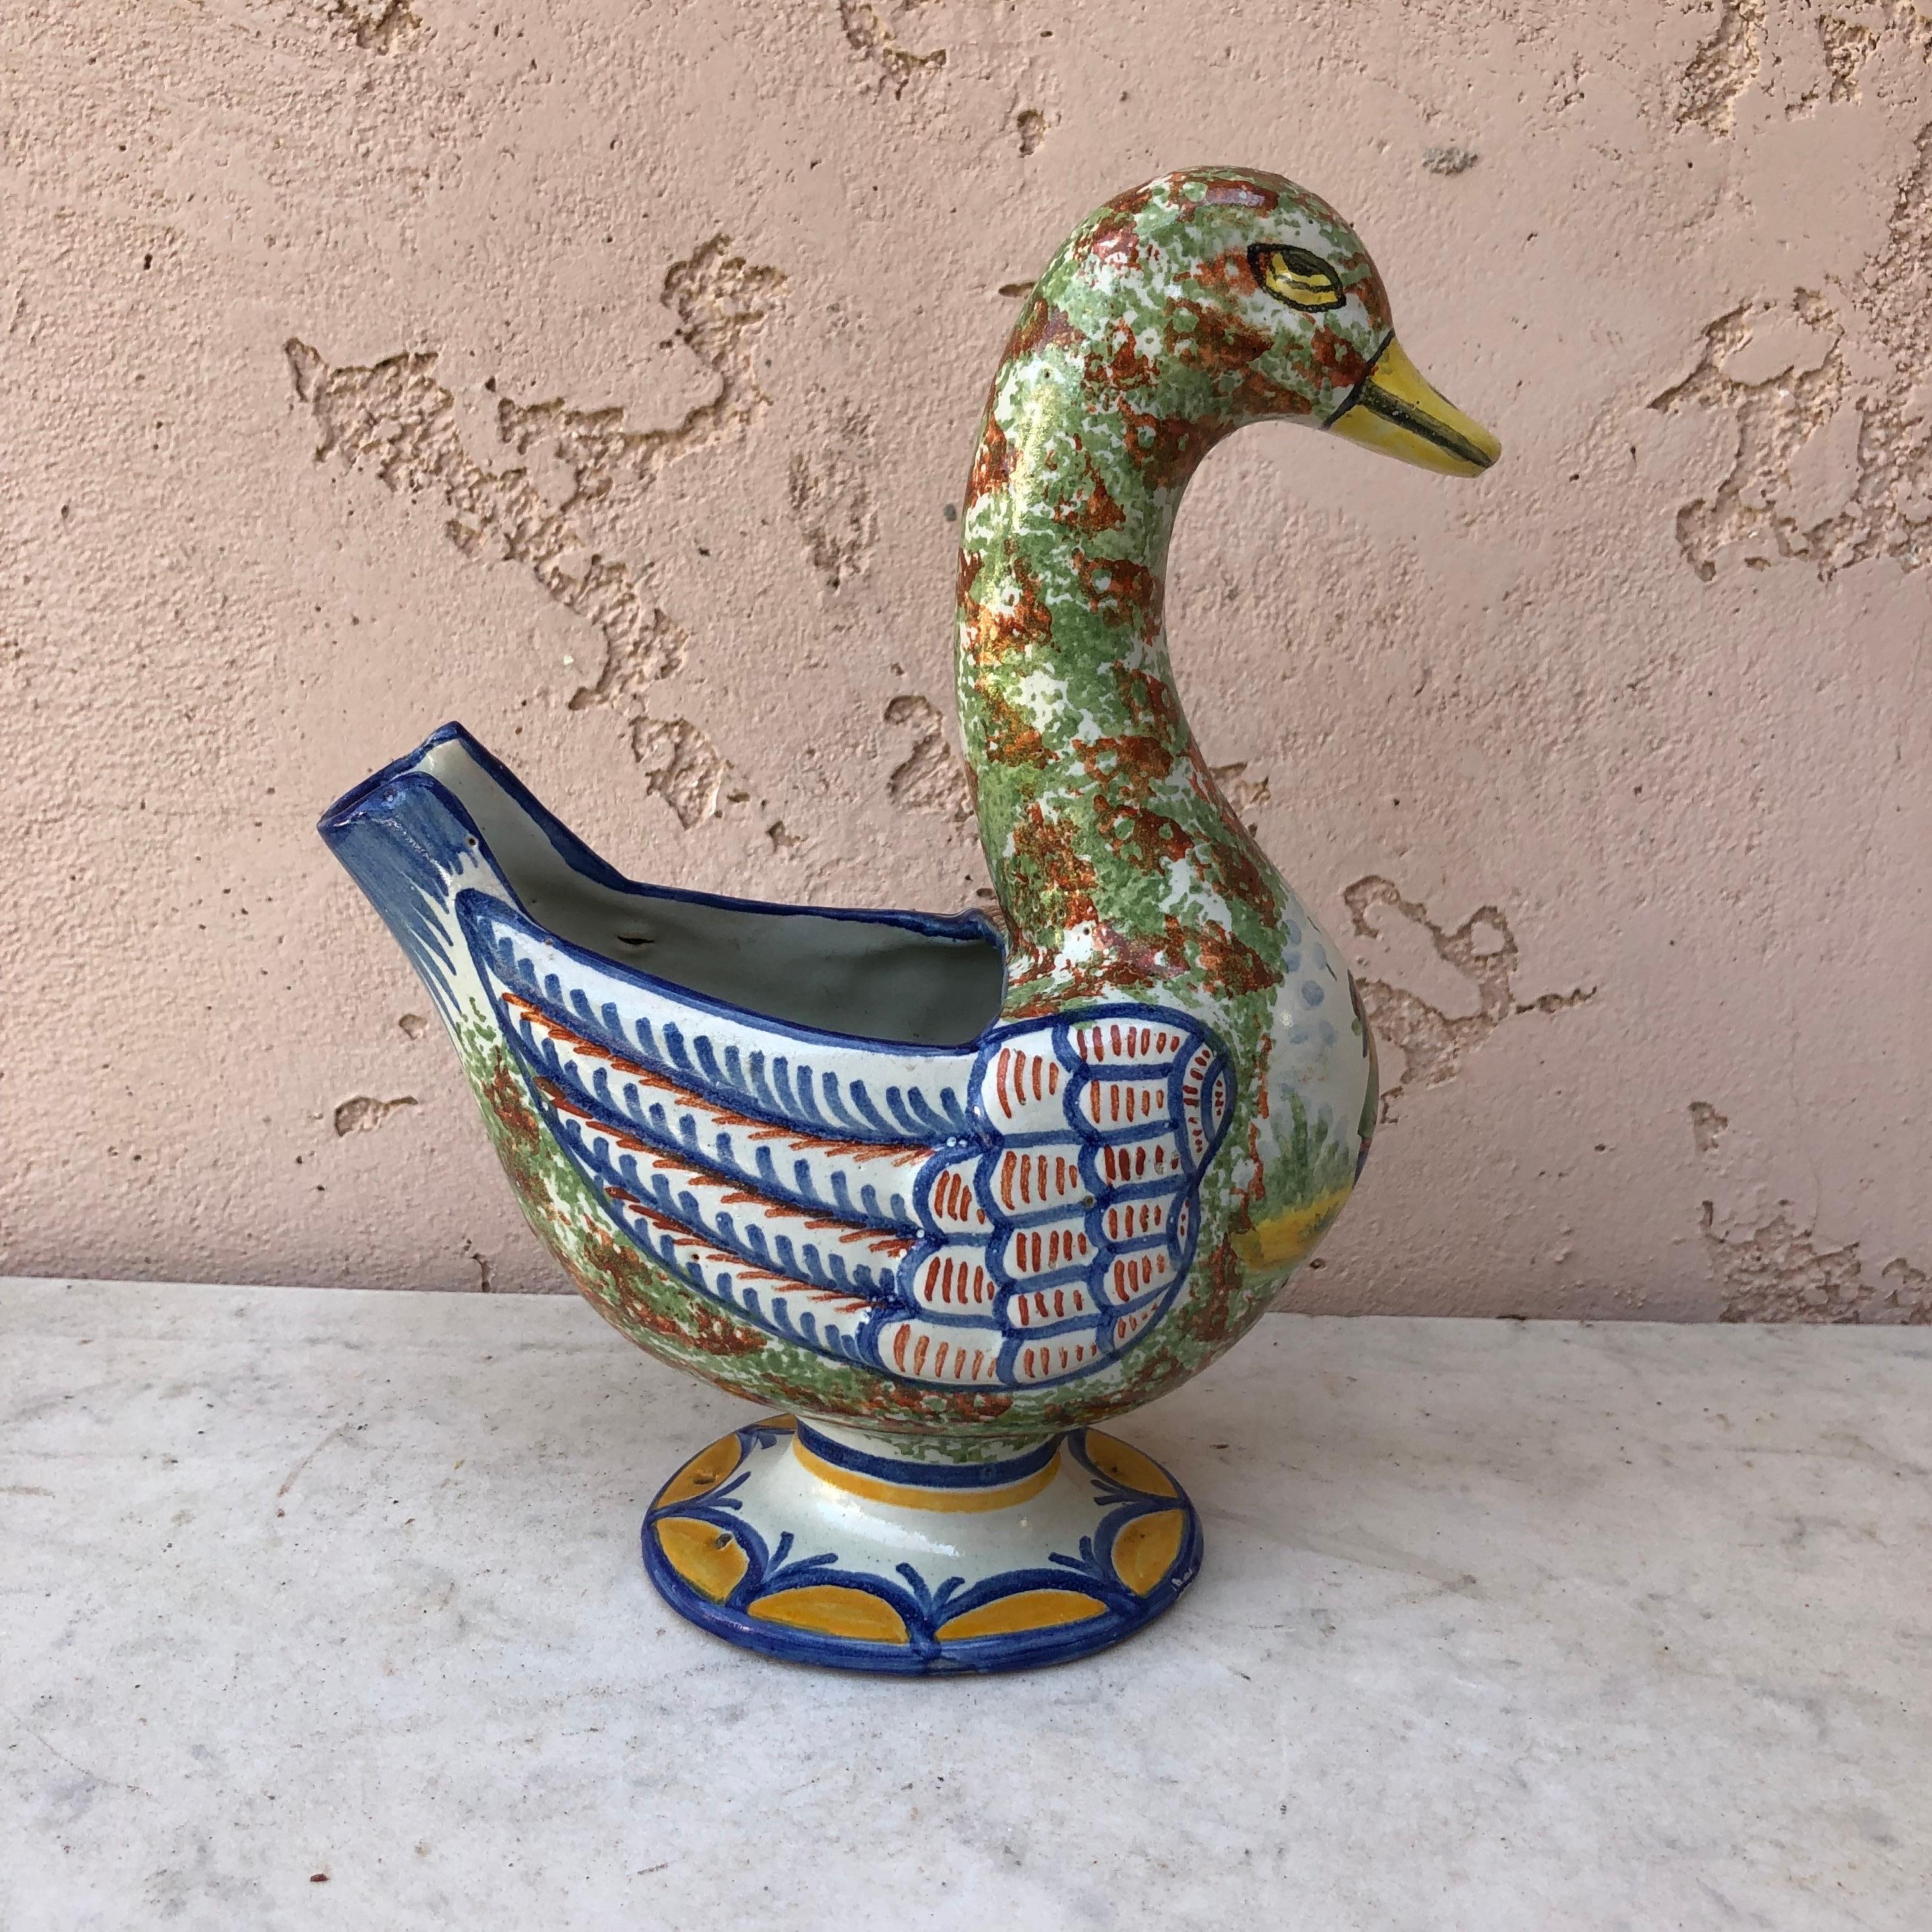 Rustic Unusual French Faience Duck Vase Quimper Hubaudiere, circa 1880